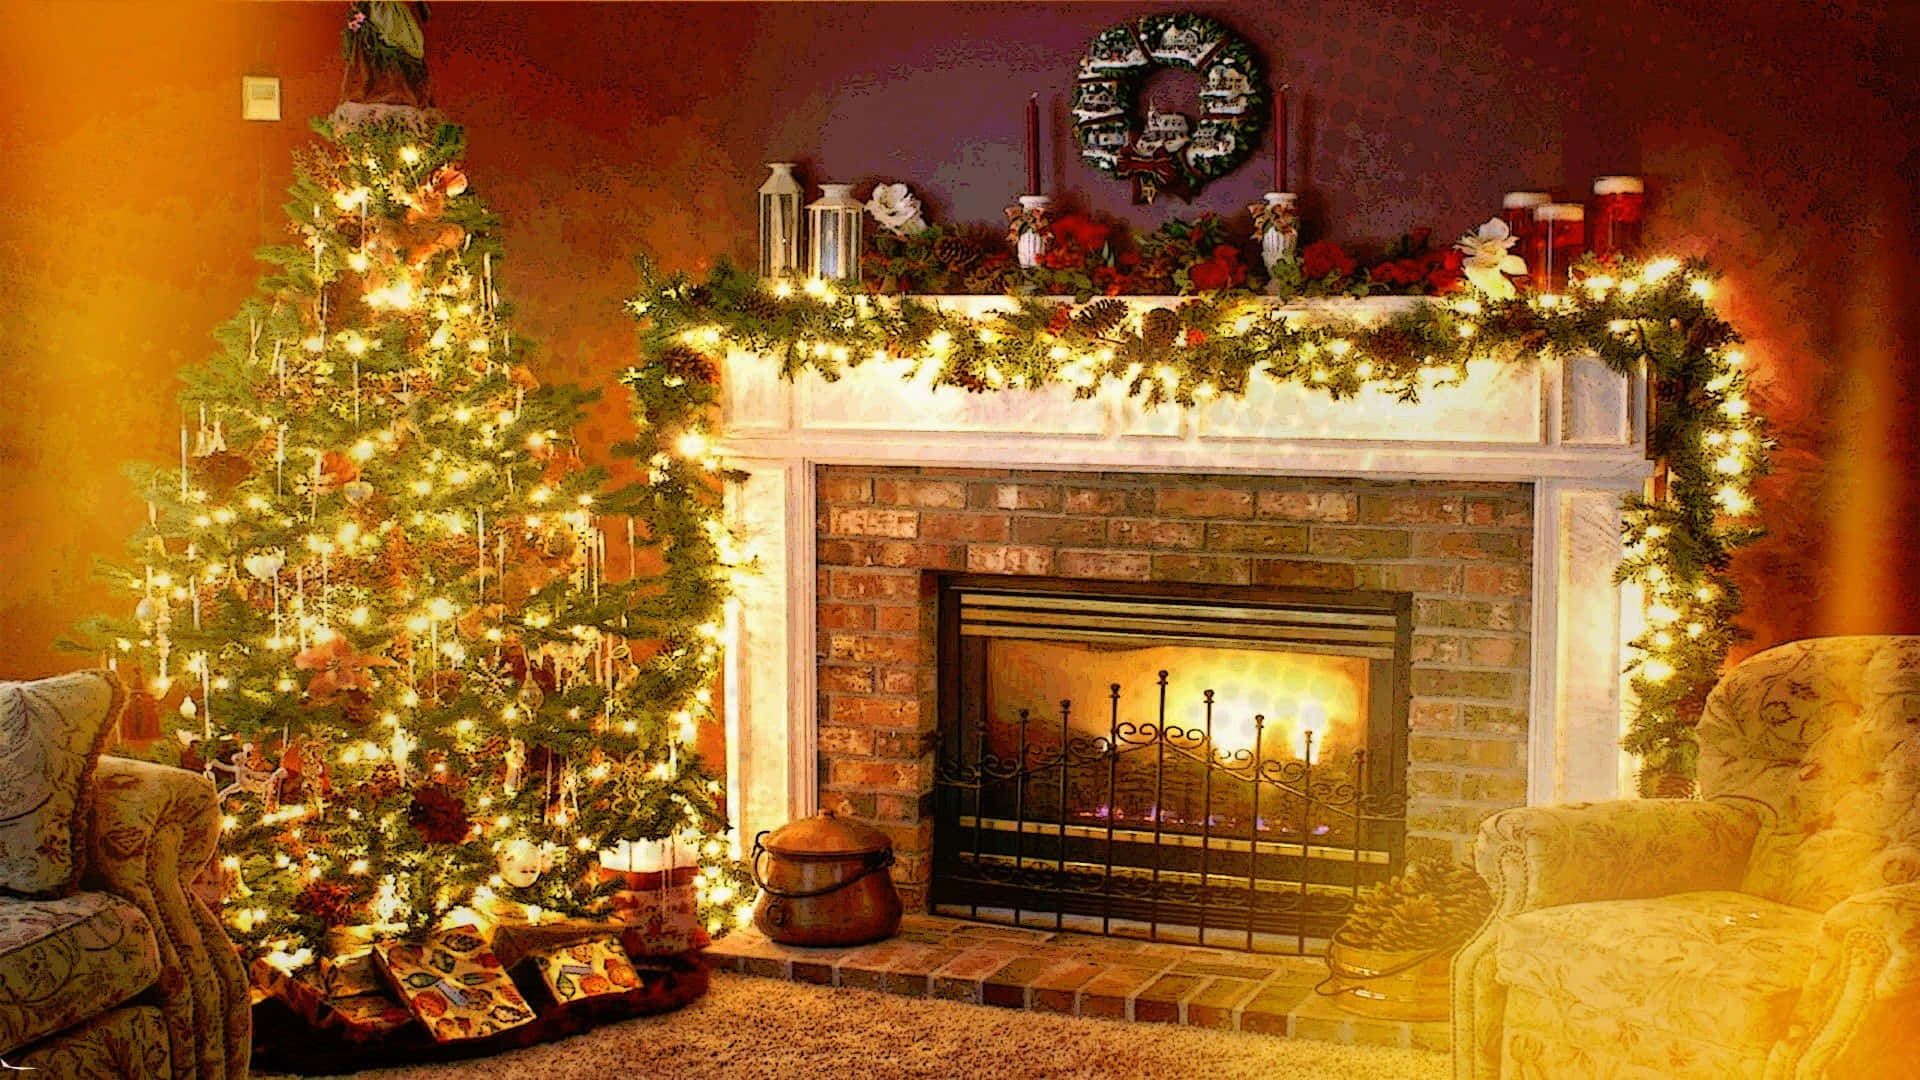 Download Cozy and Festive Christmas Living Room | Wallpapers.com